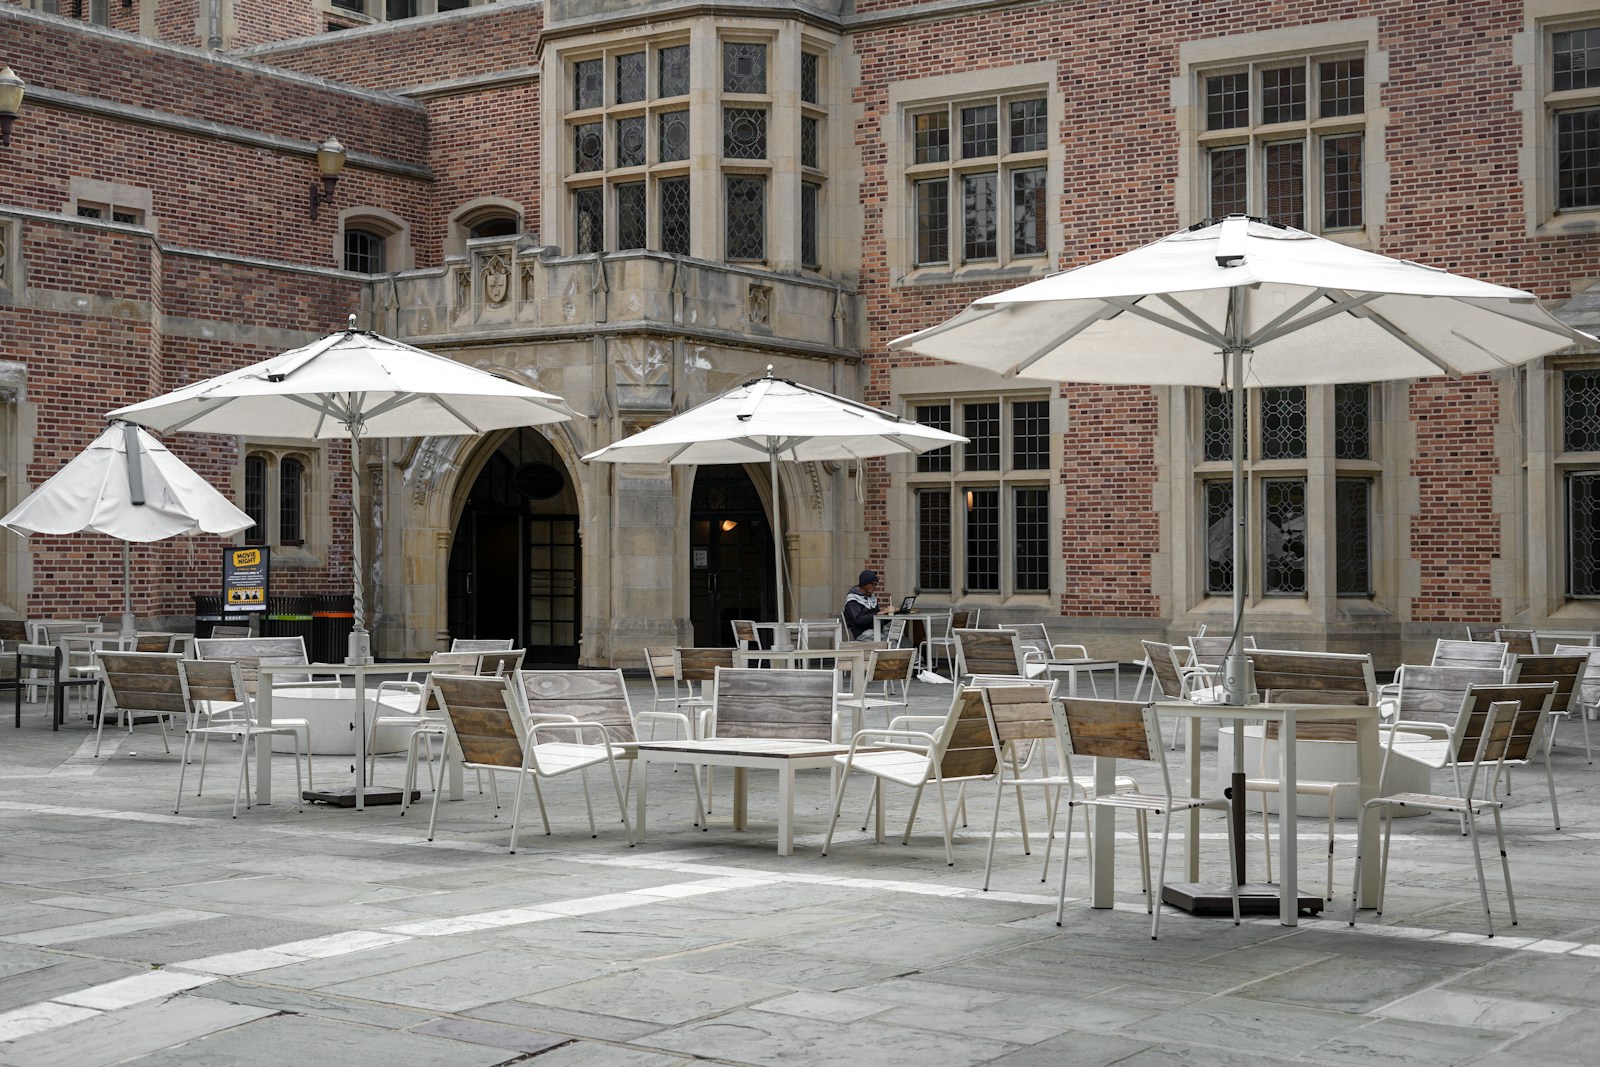 tables and chairs with umbrellas in front of a building